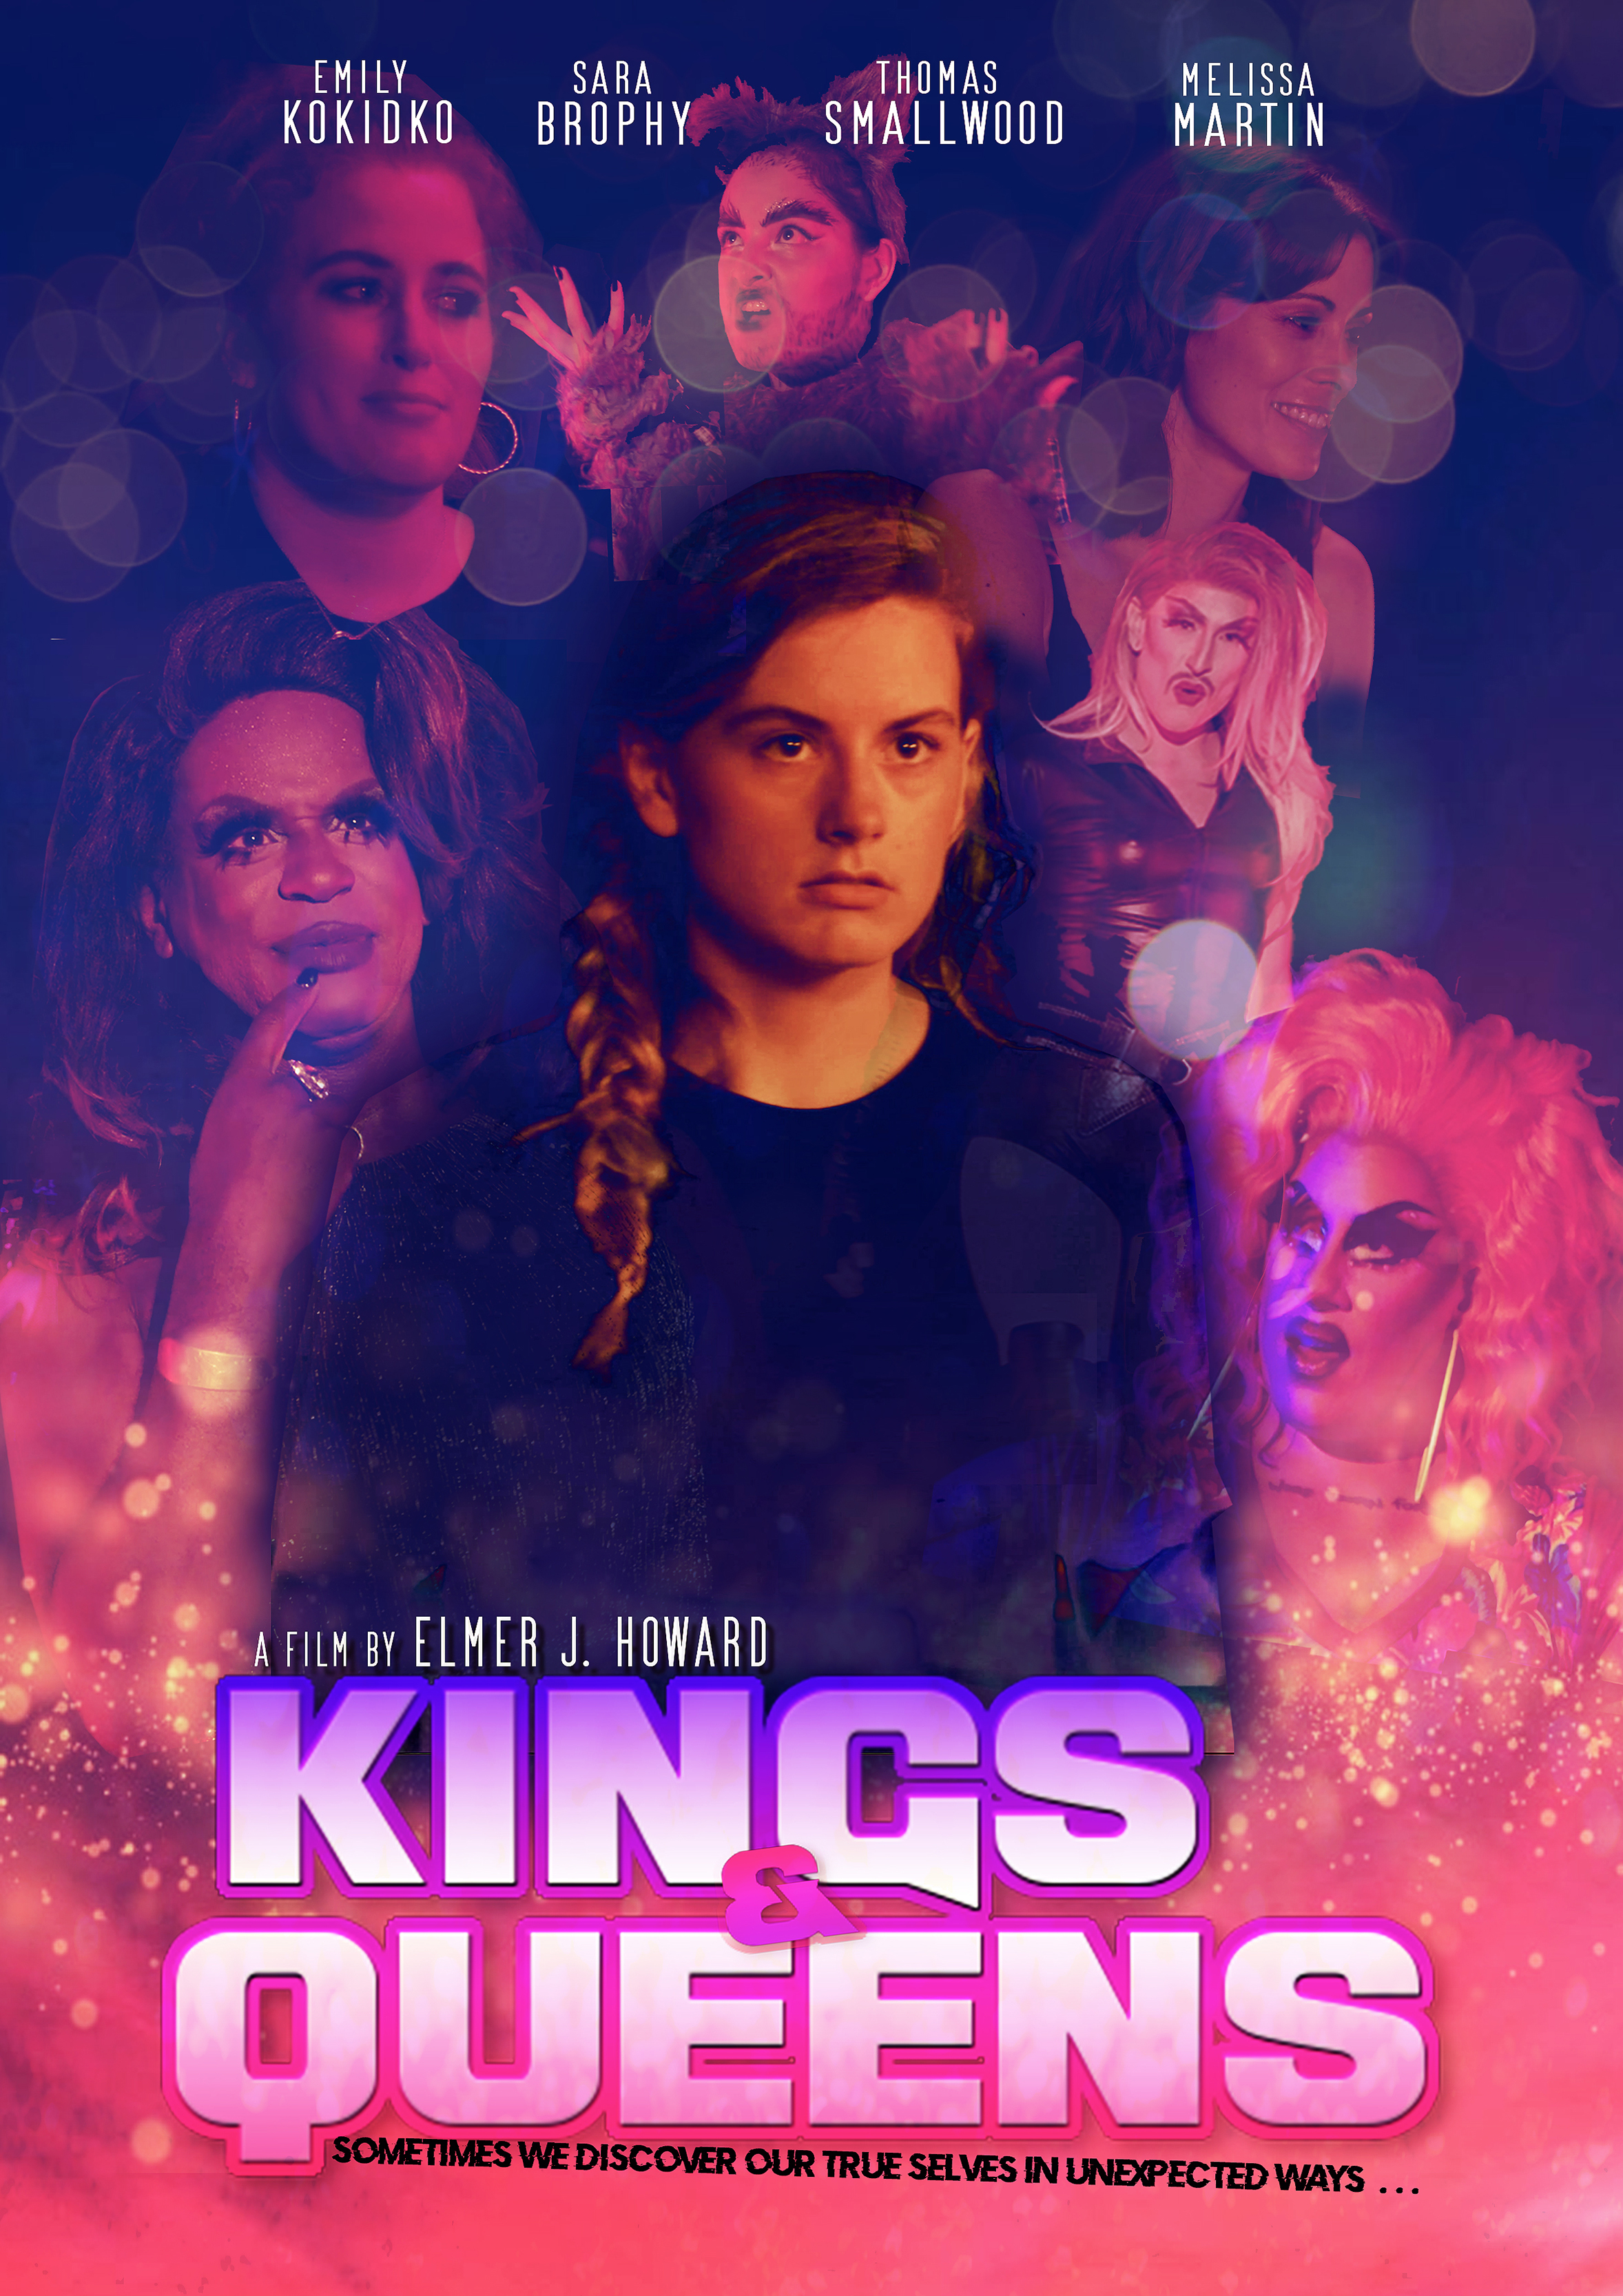 Local Filmmaker Wins Big with LGBT-Themed Short Film, "Kings & Queens"